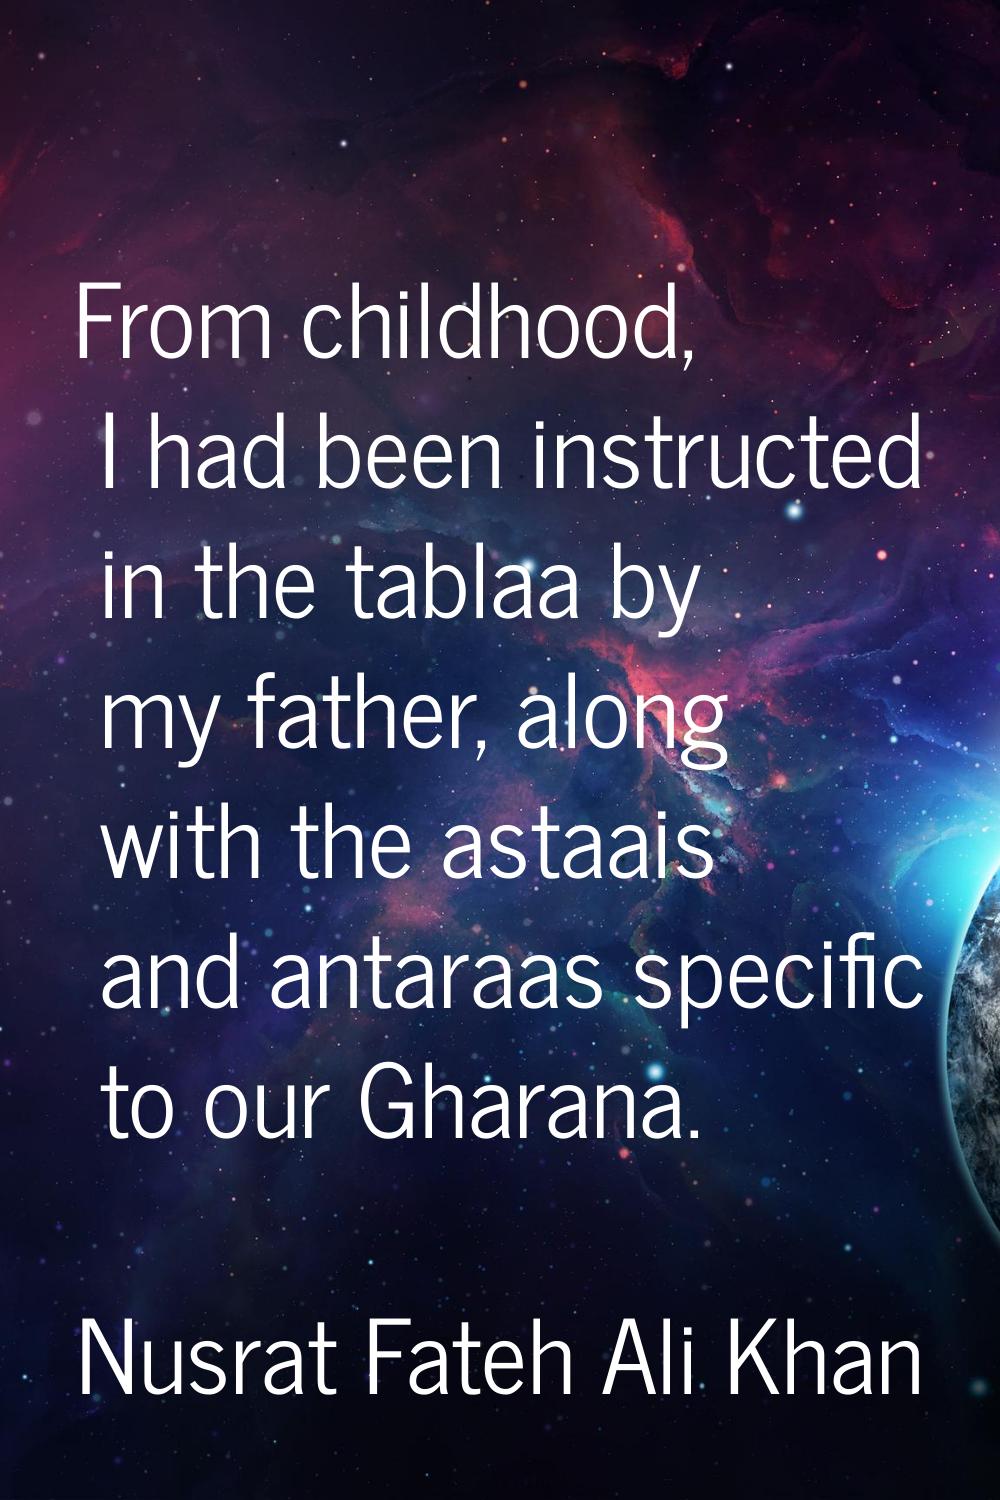 From childhood, I had been instructed in the tablaa by my father, along with the astaais and antara